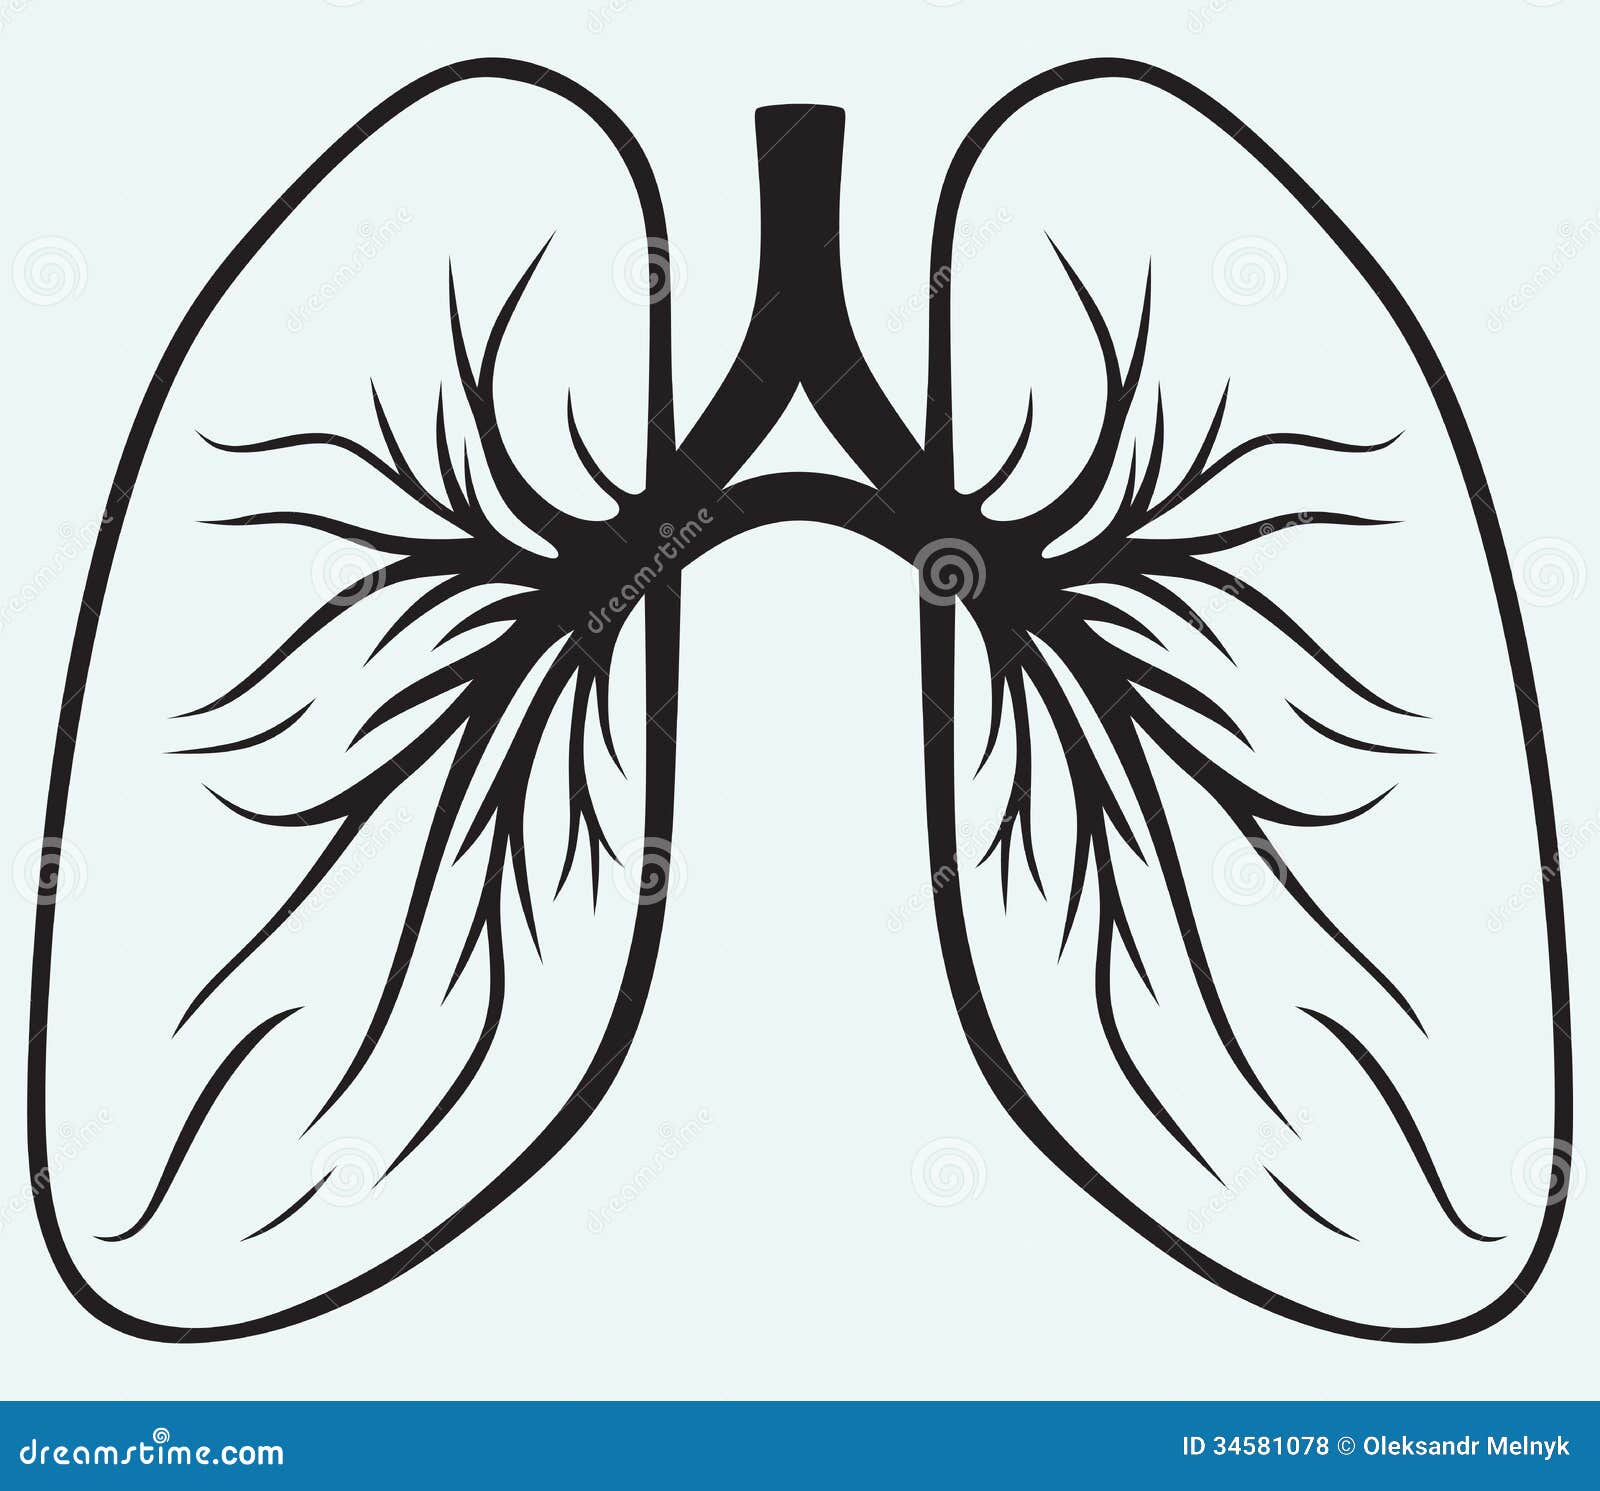 lungs clipart vector - photo #42